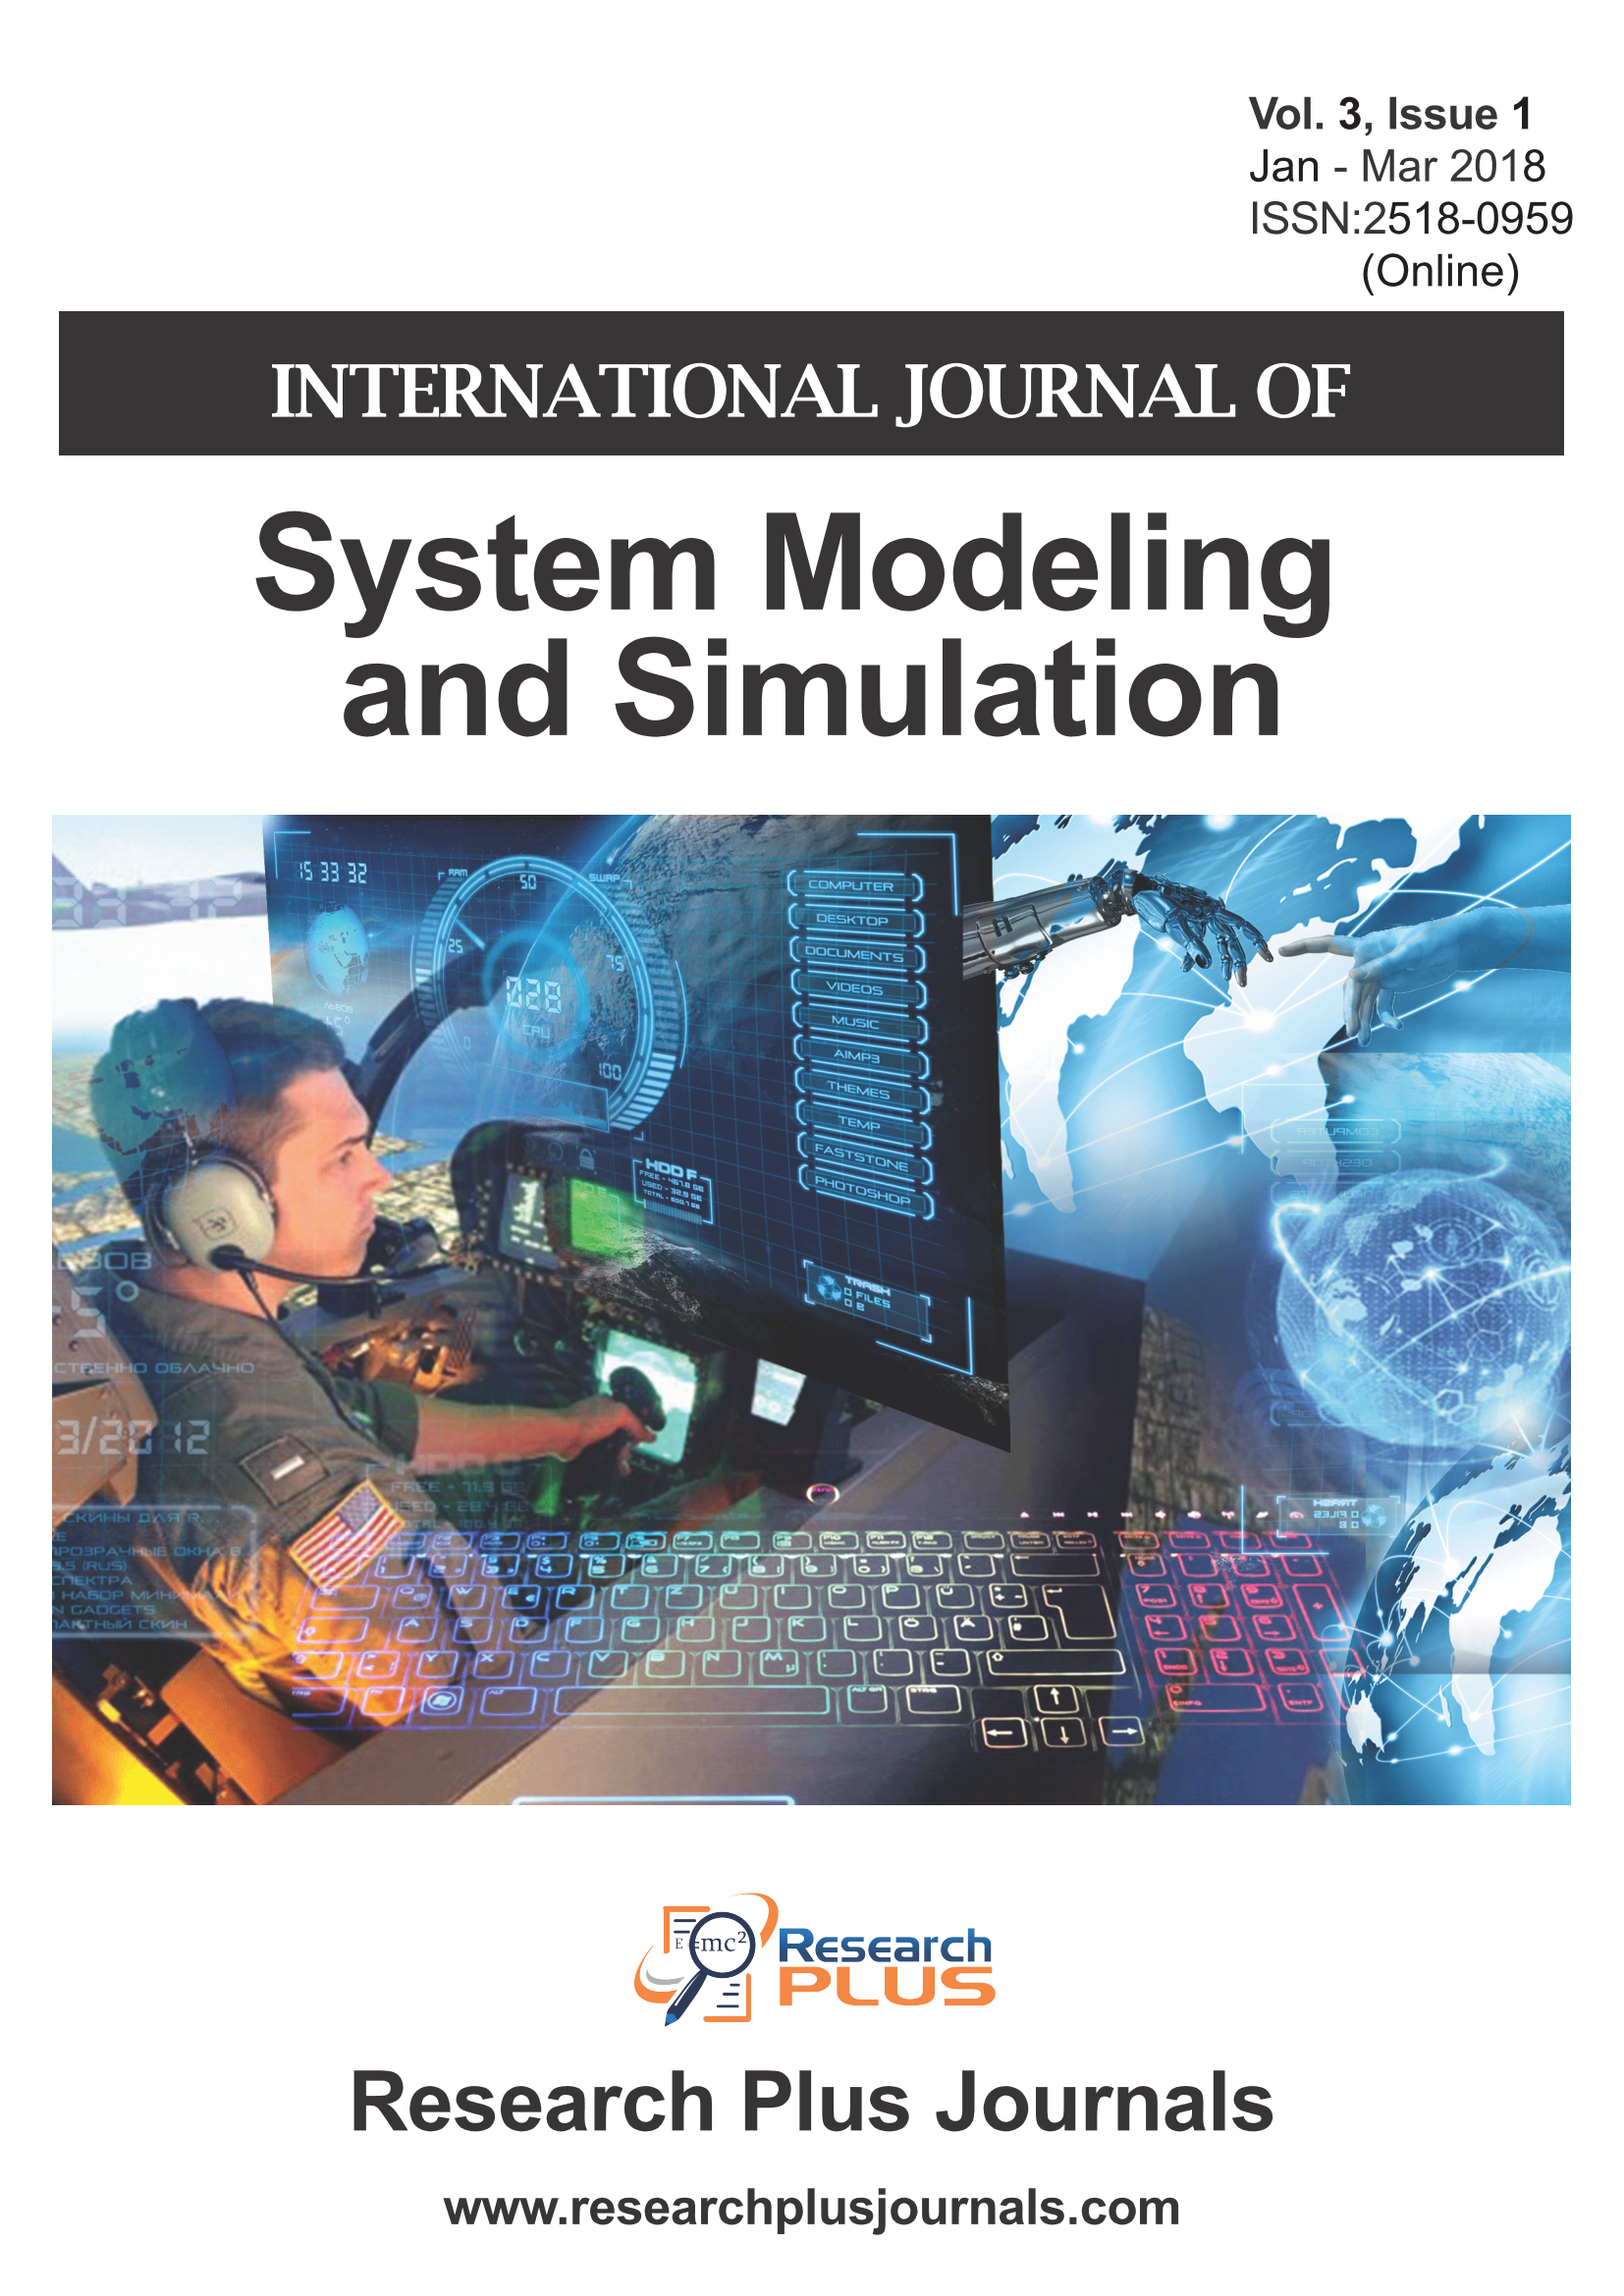 Volume 3, Issue 1, International Journal of System Modeling and Simulation (IJSMS)  (Online ISSN: 2518-0959)